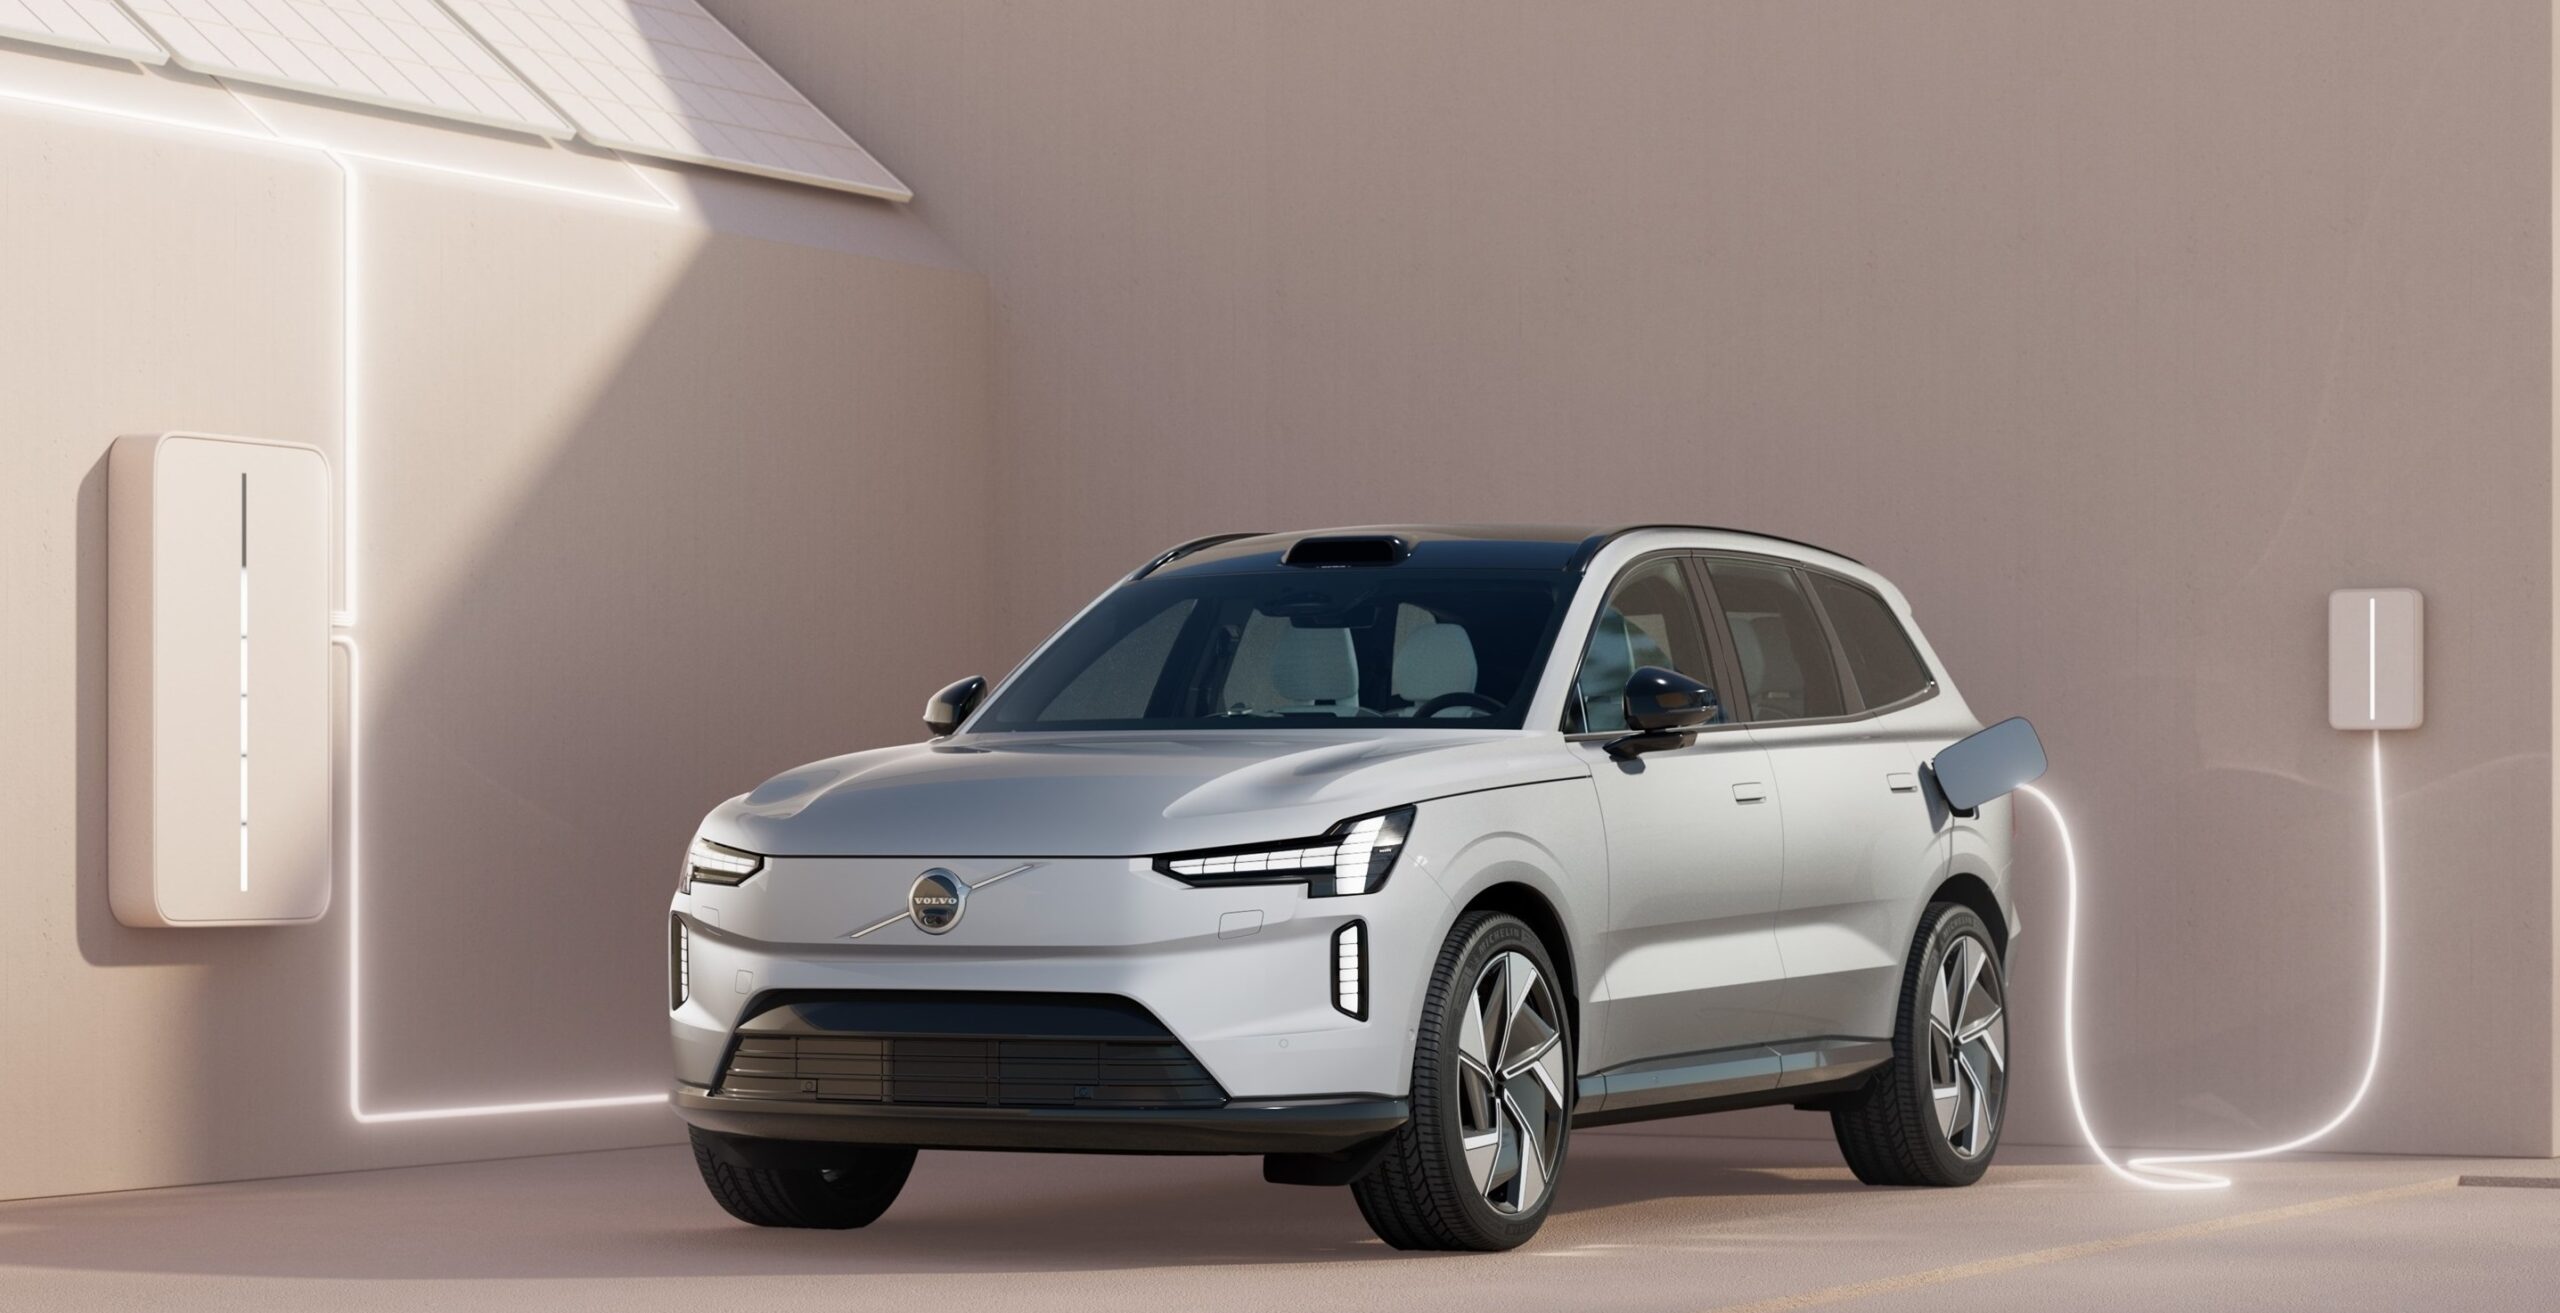 The 2024 Volvo EX90 is the company’s vision of a large family SUV in the electric age. A home energy management system features a bi-directional wall box to power a home.